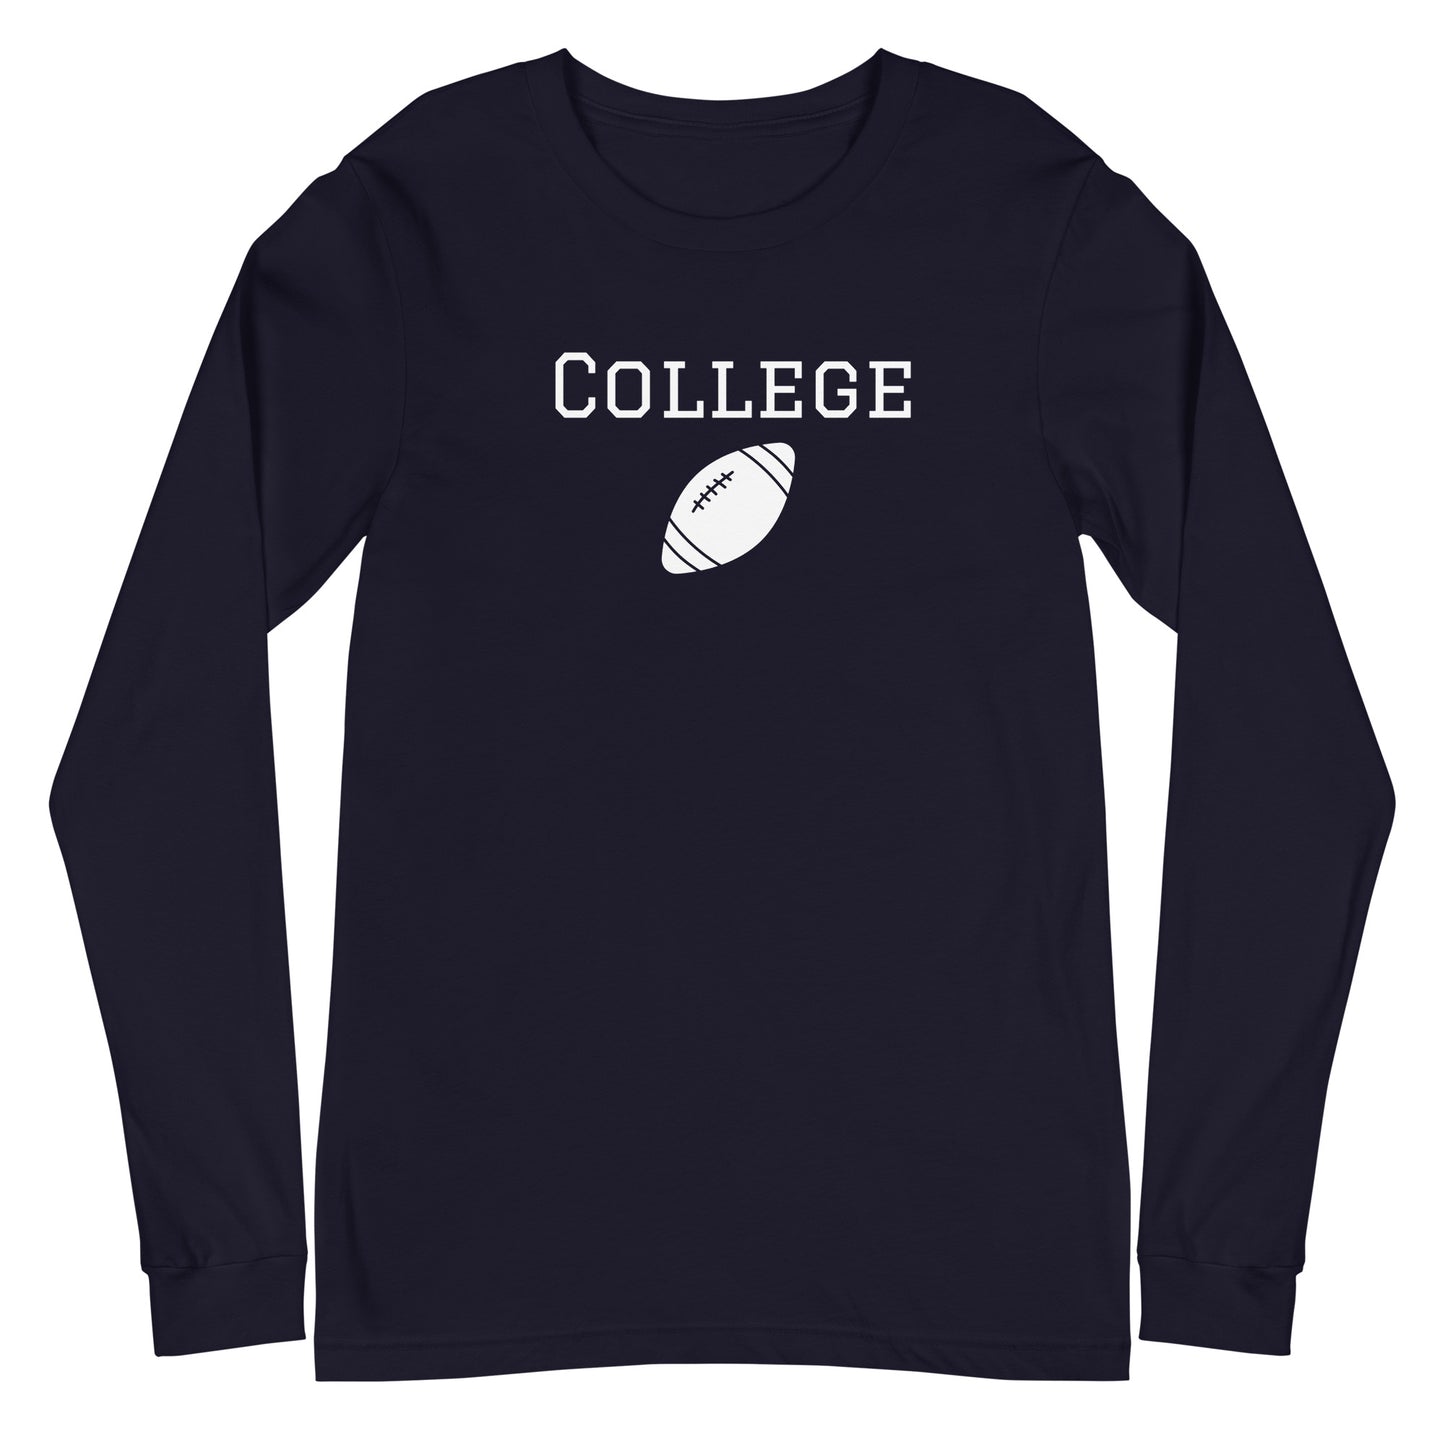 Navy blue long sleeve tee shirt that says 'college' football 